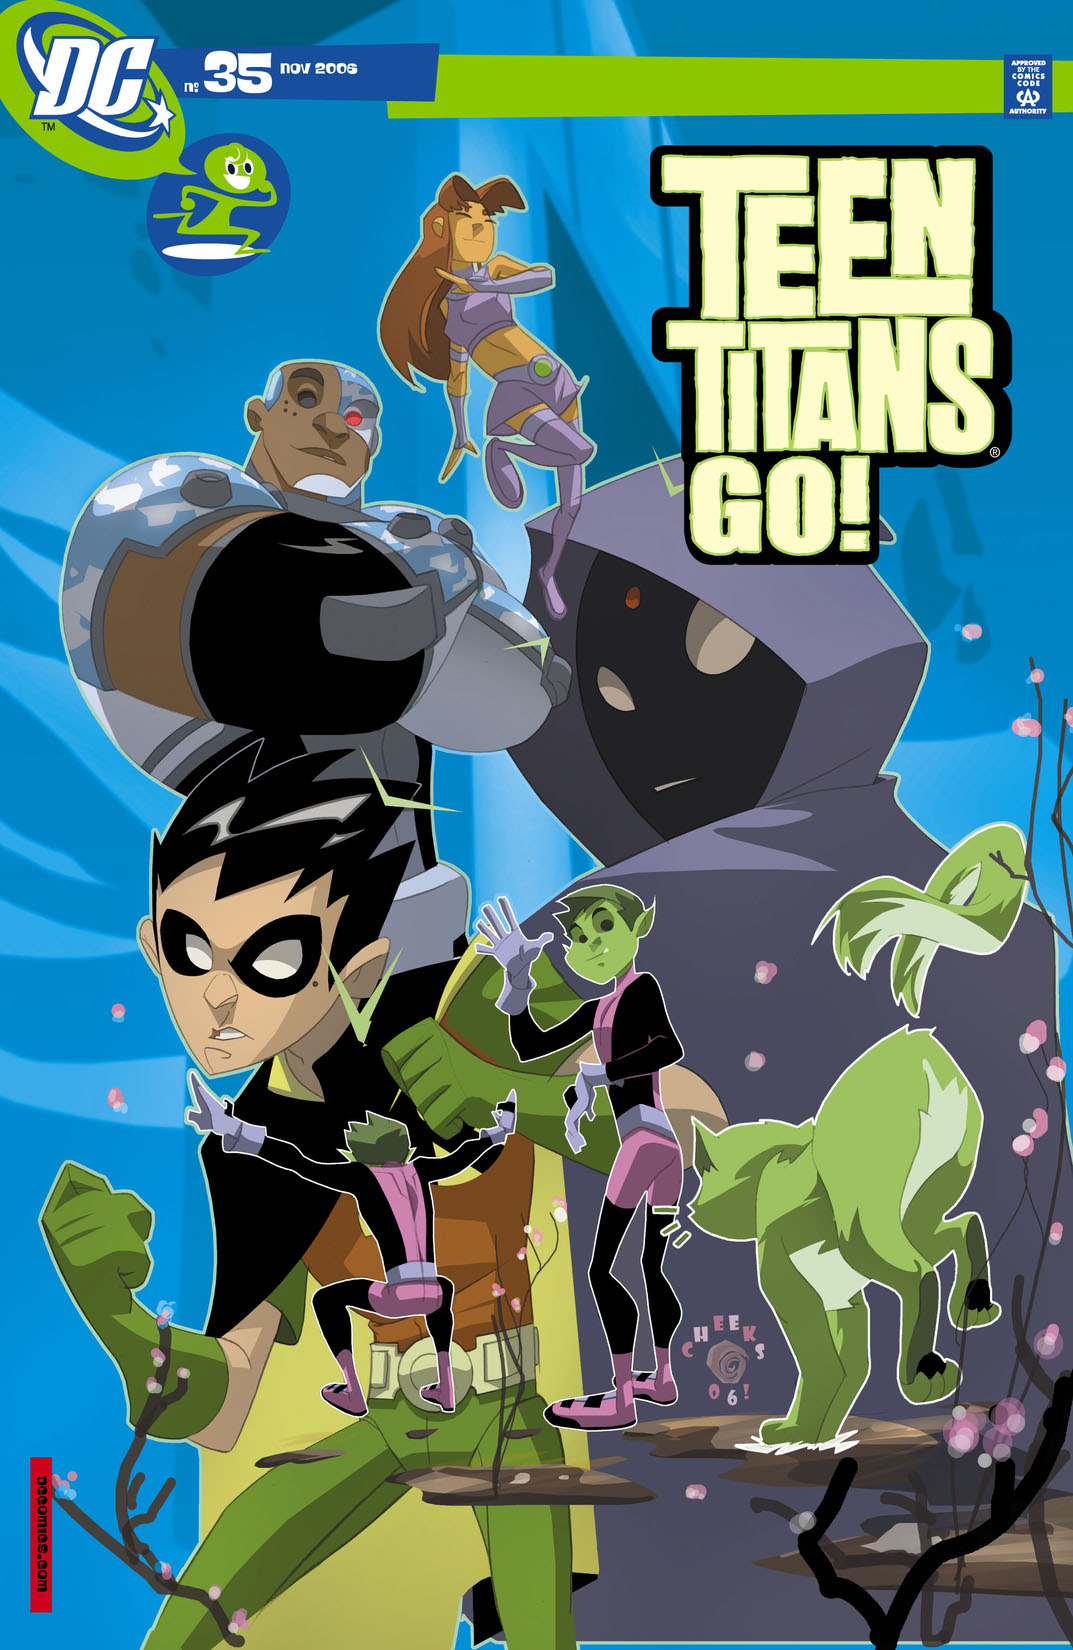 Teen Titans Go! (2003-) #35 preview images